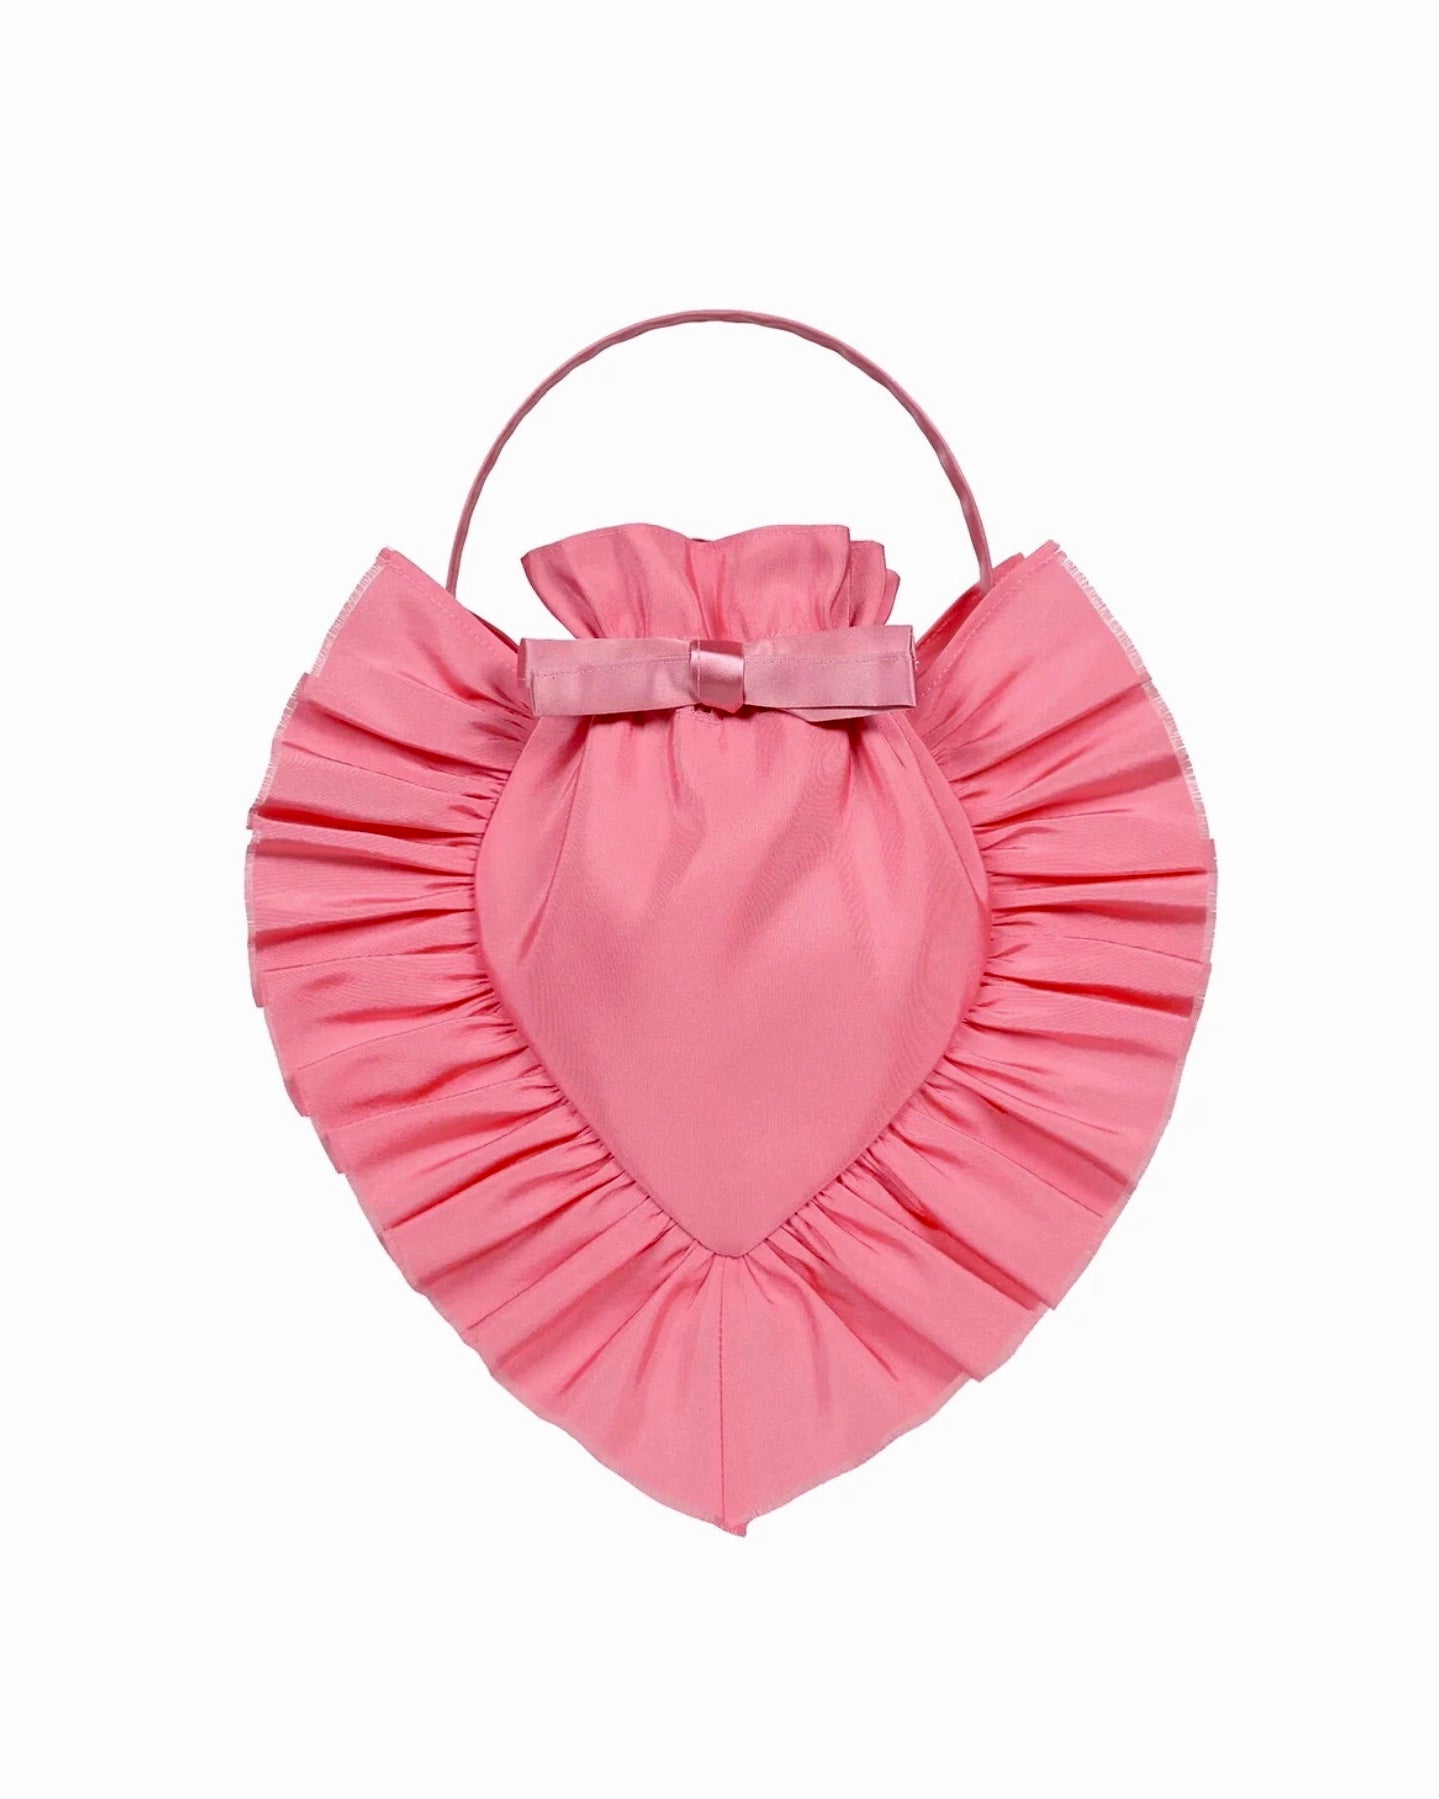 Camille Albertine Heart Shaped Diana Bag in Pink Silk and Satin